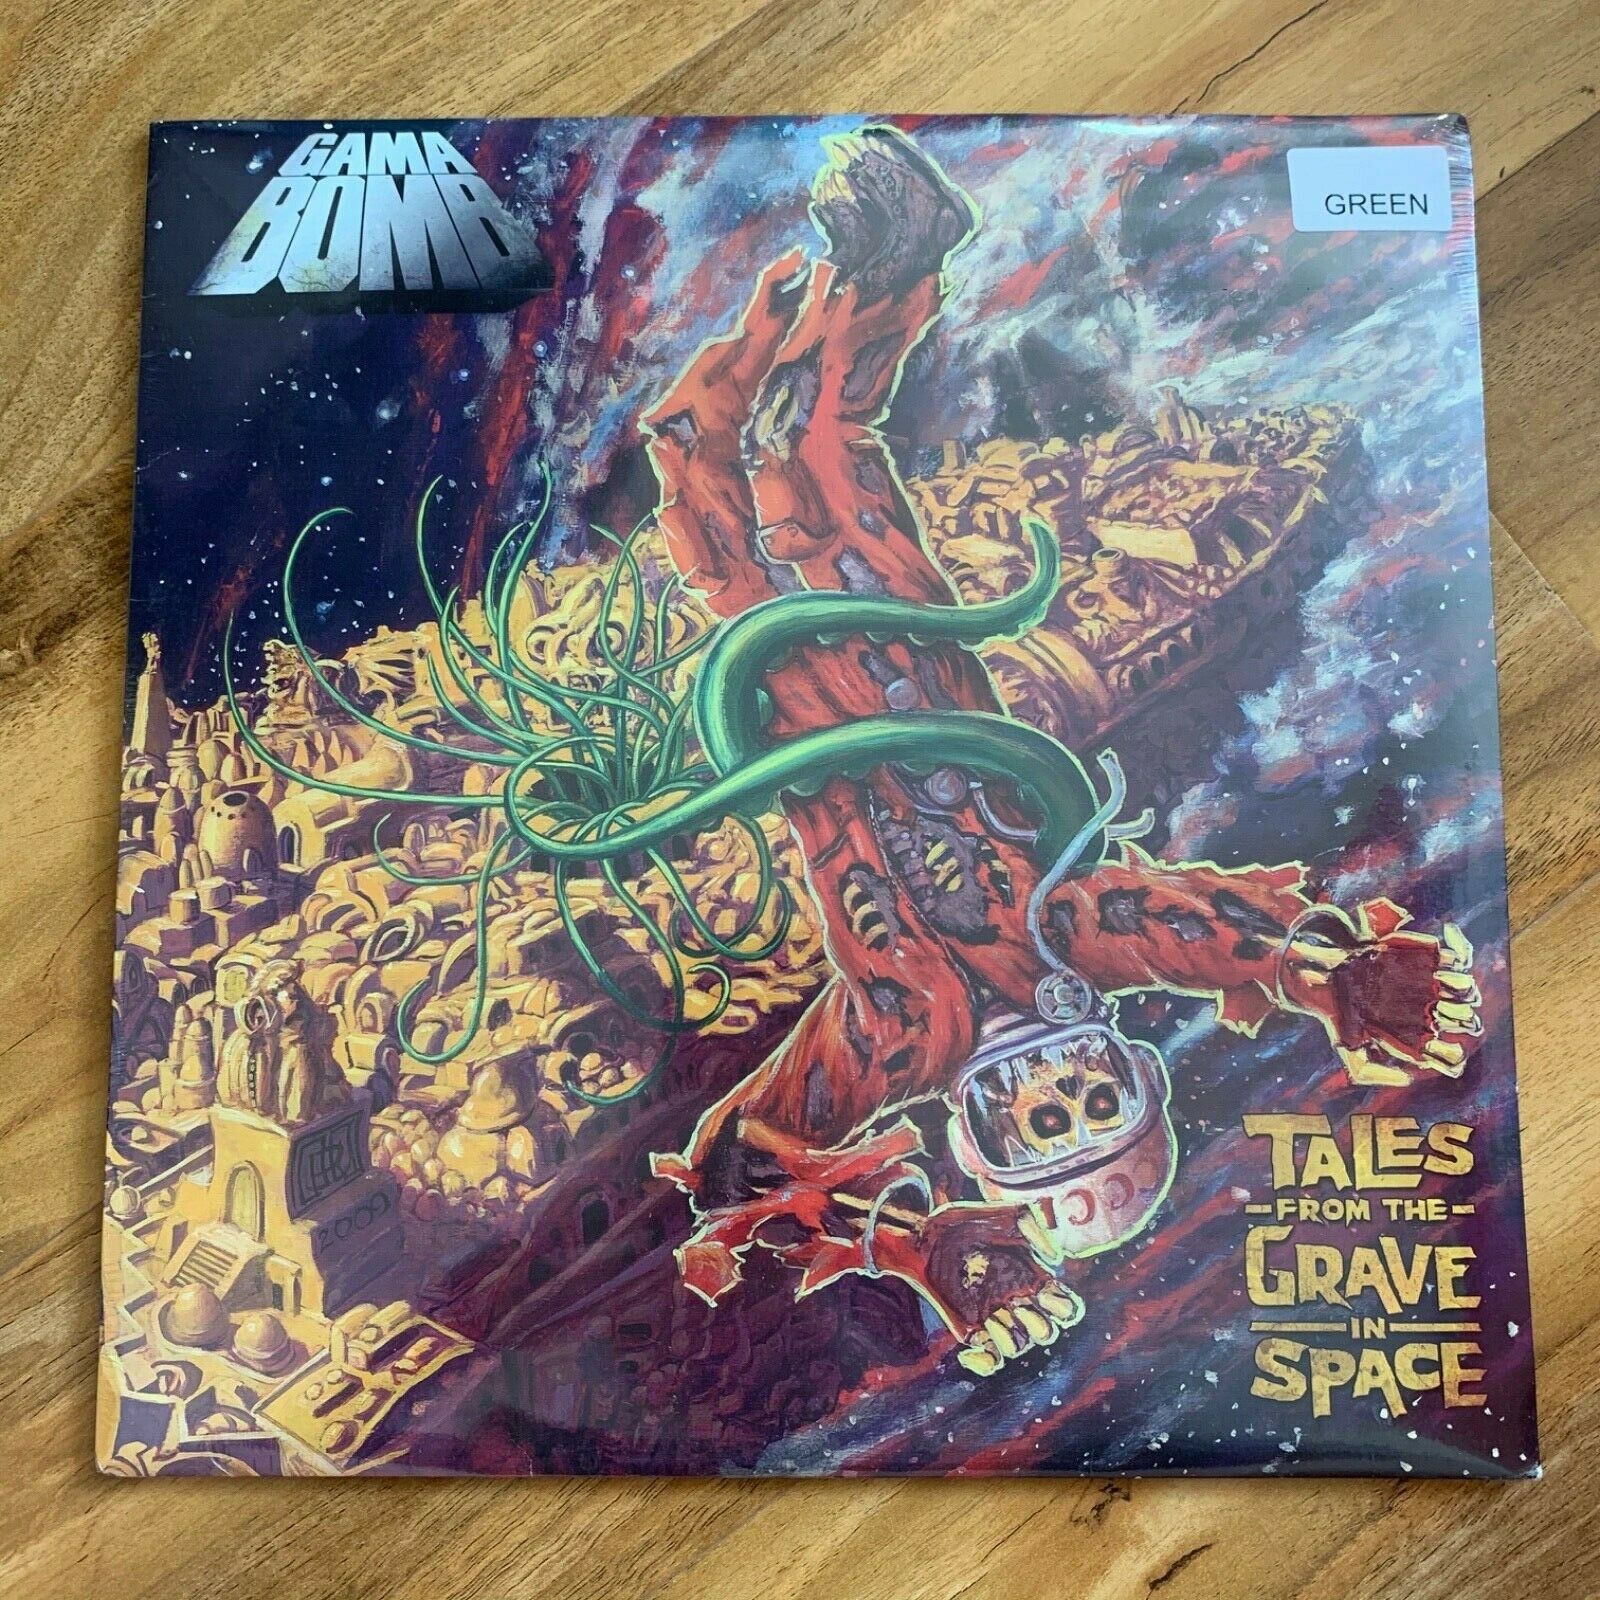 popsike.com - Gama Bomb - Tales from the grave in space Vinyl